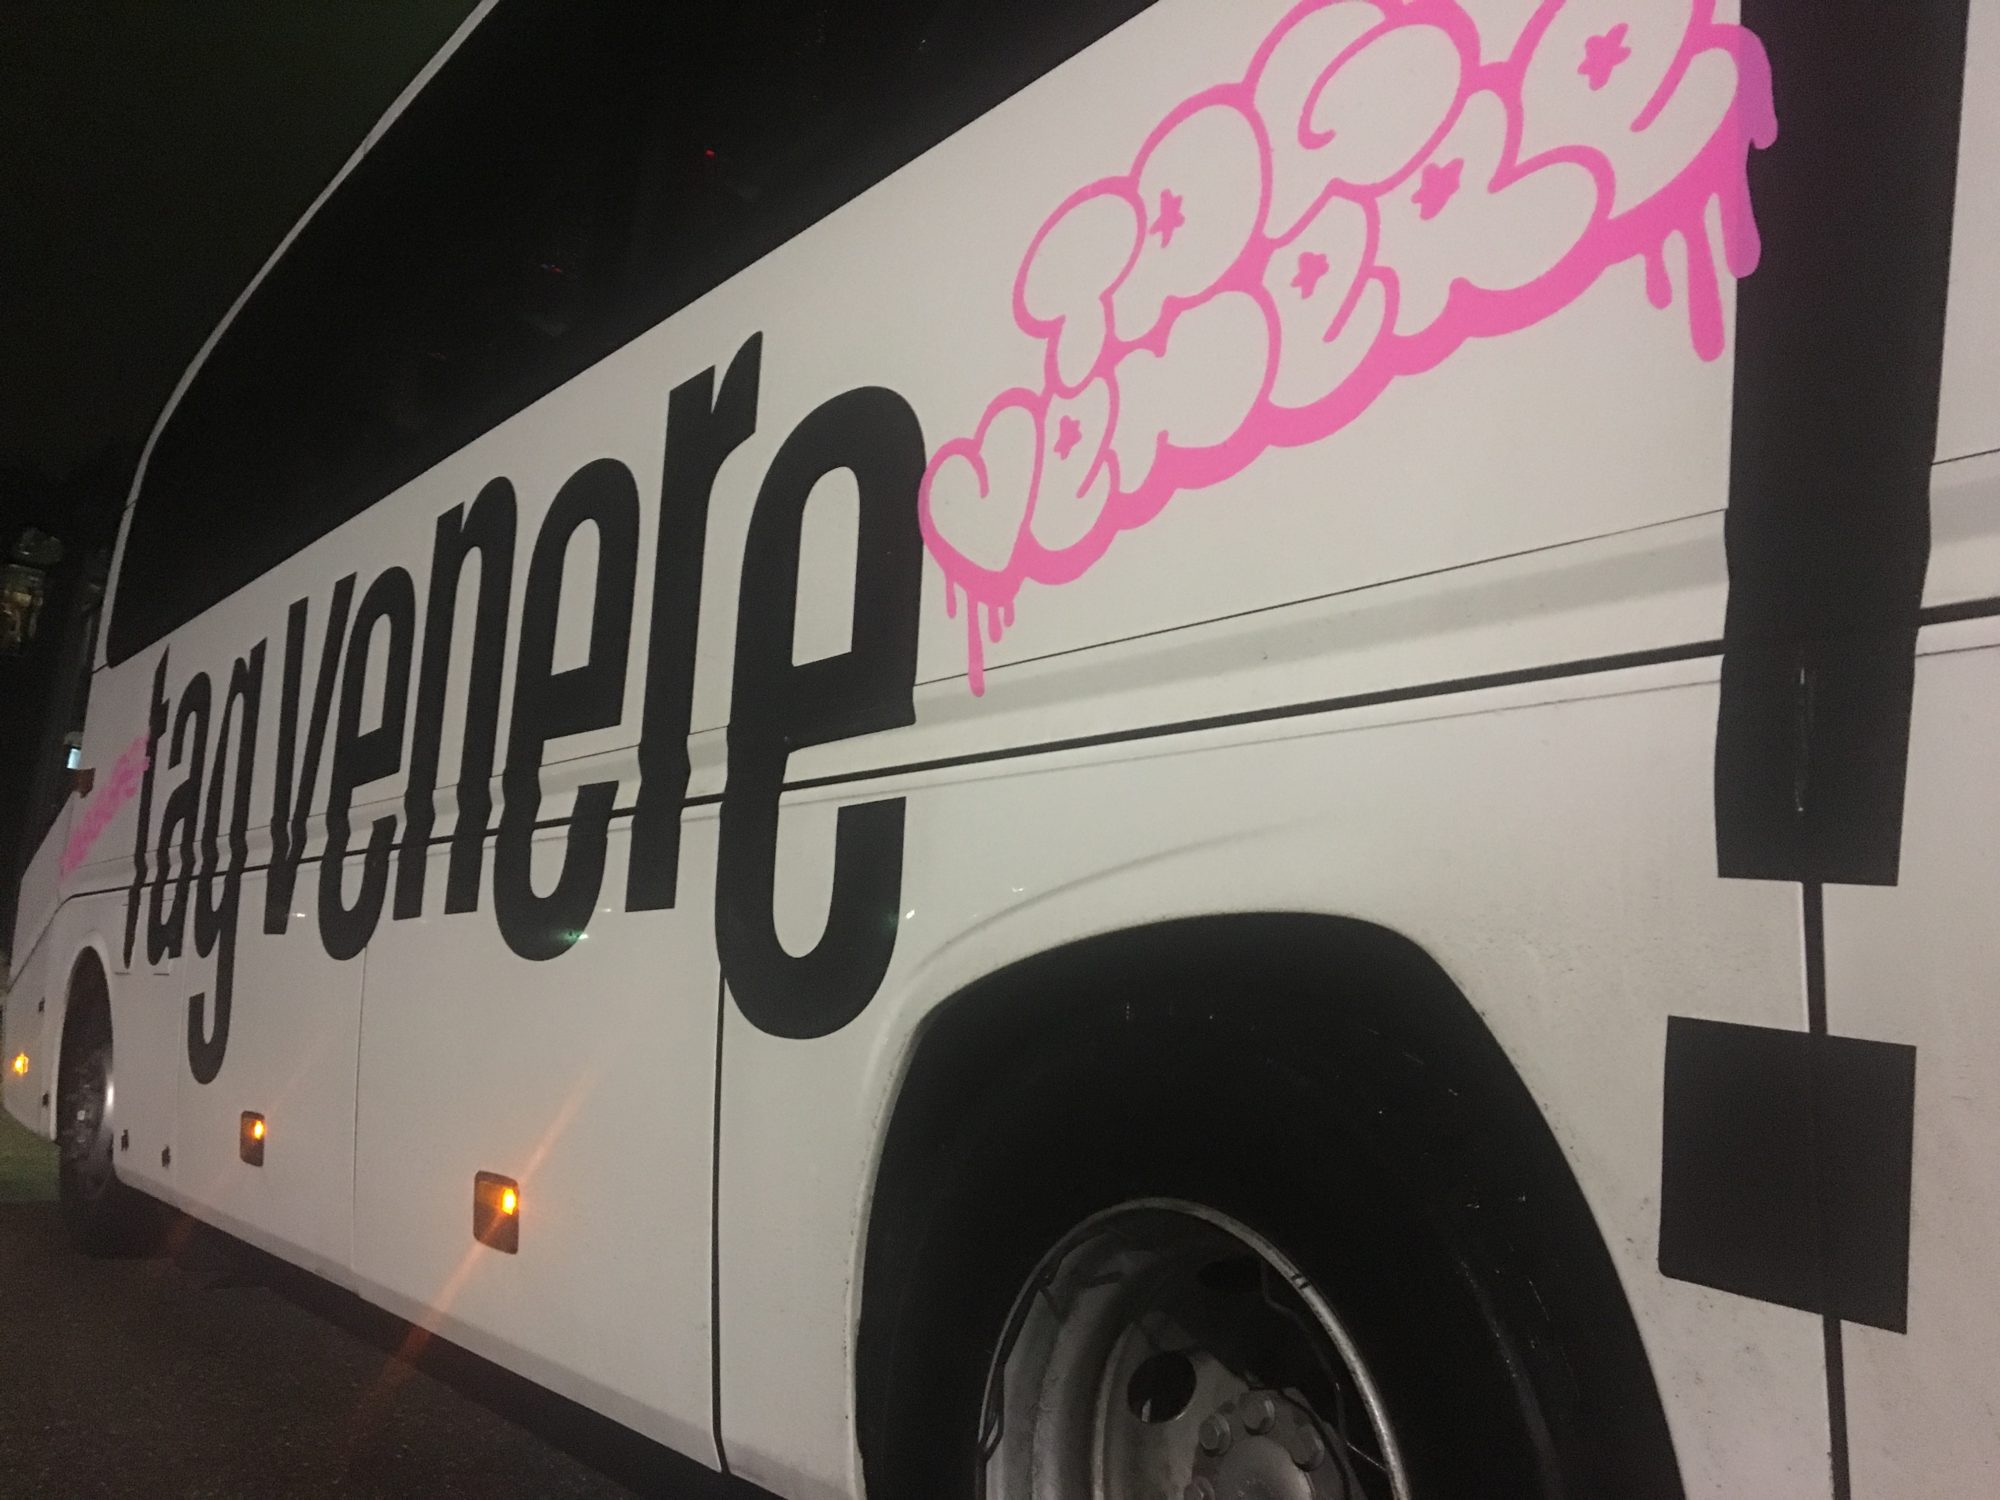 TAG VENERE - Another anagram of Art Genève, printed on the XL special shuttle performative liner - bus driving from Gare Routière to Palexpo every evening